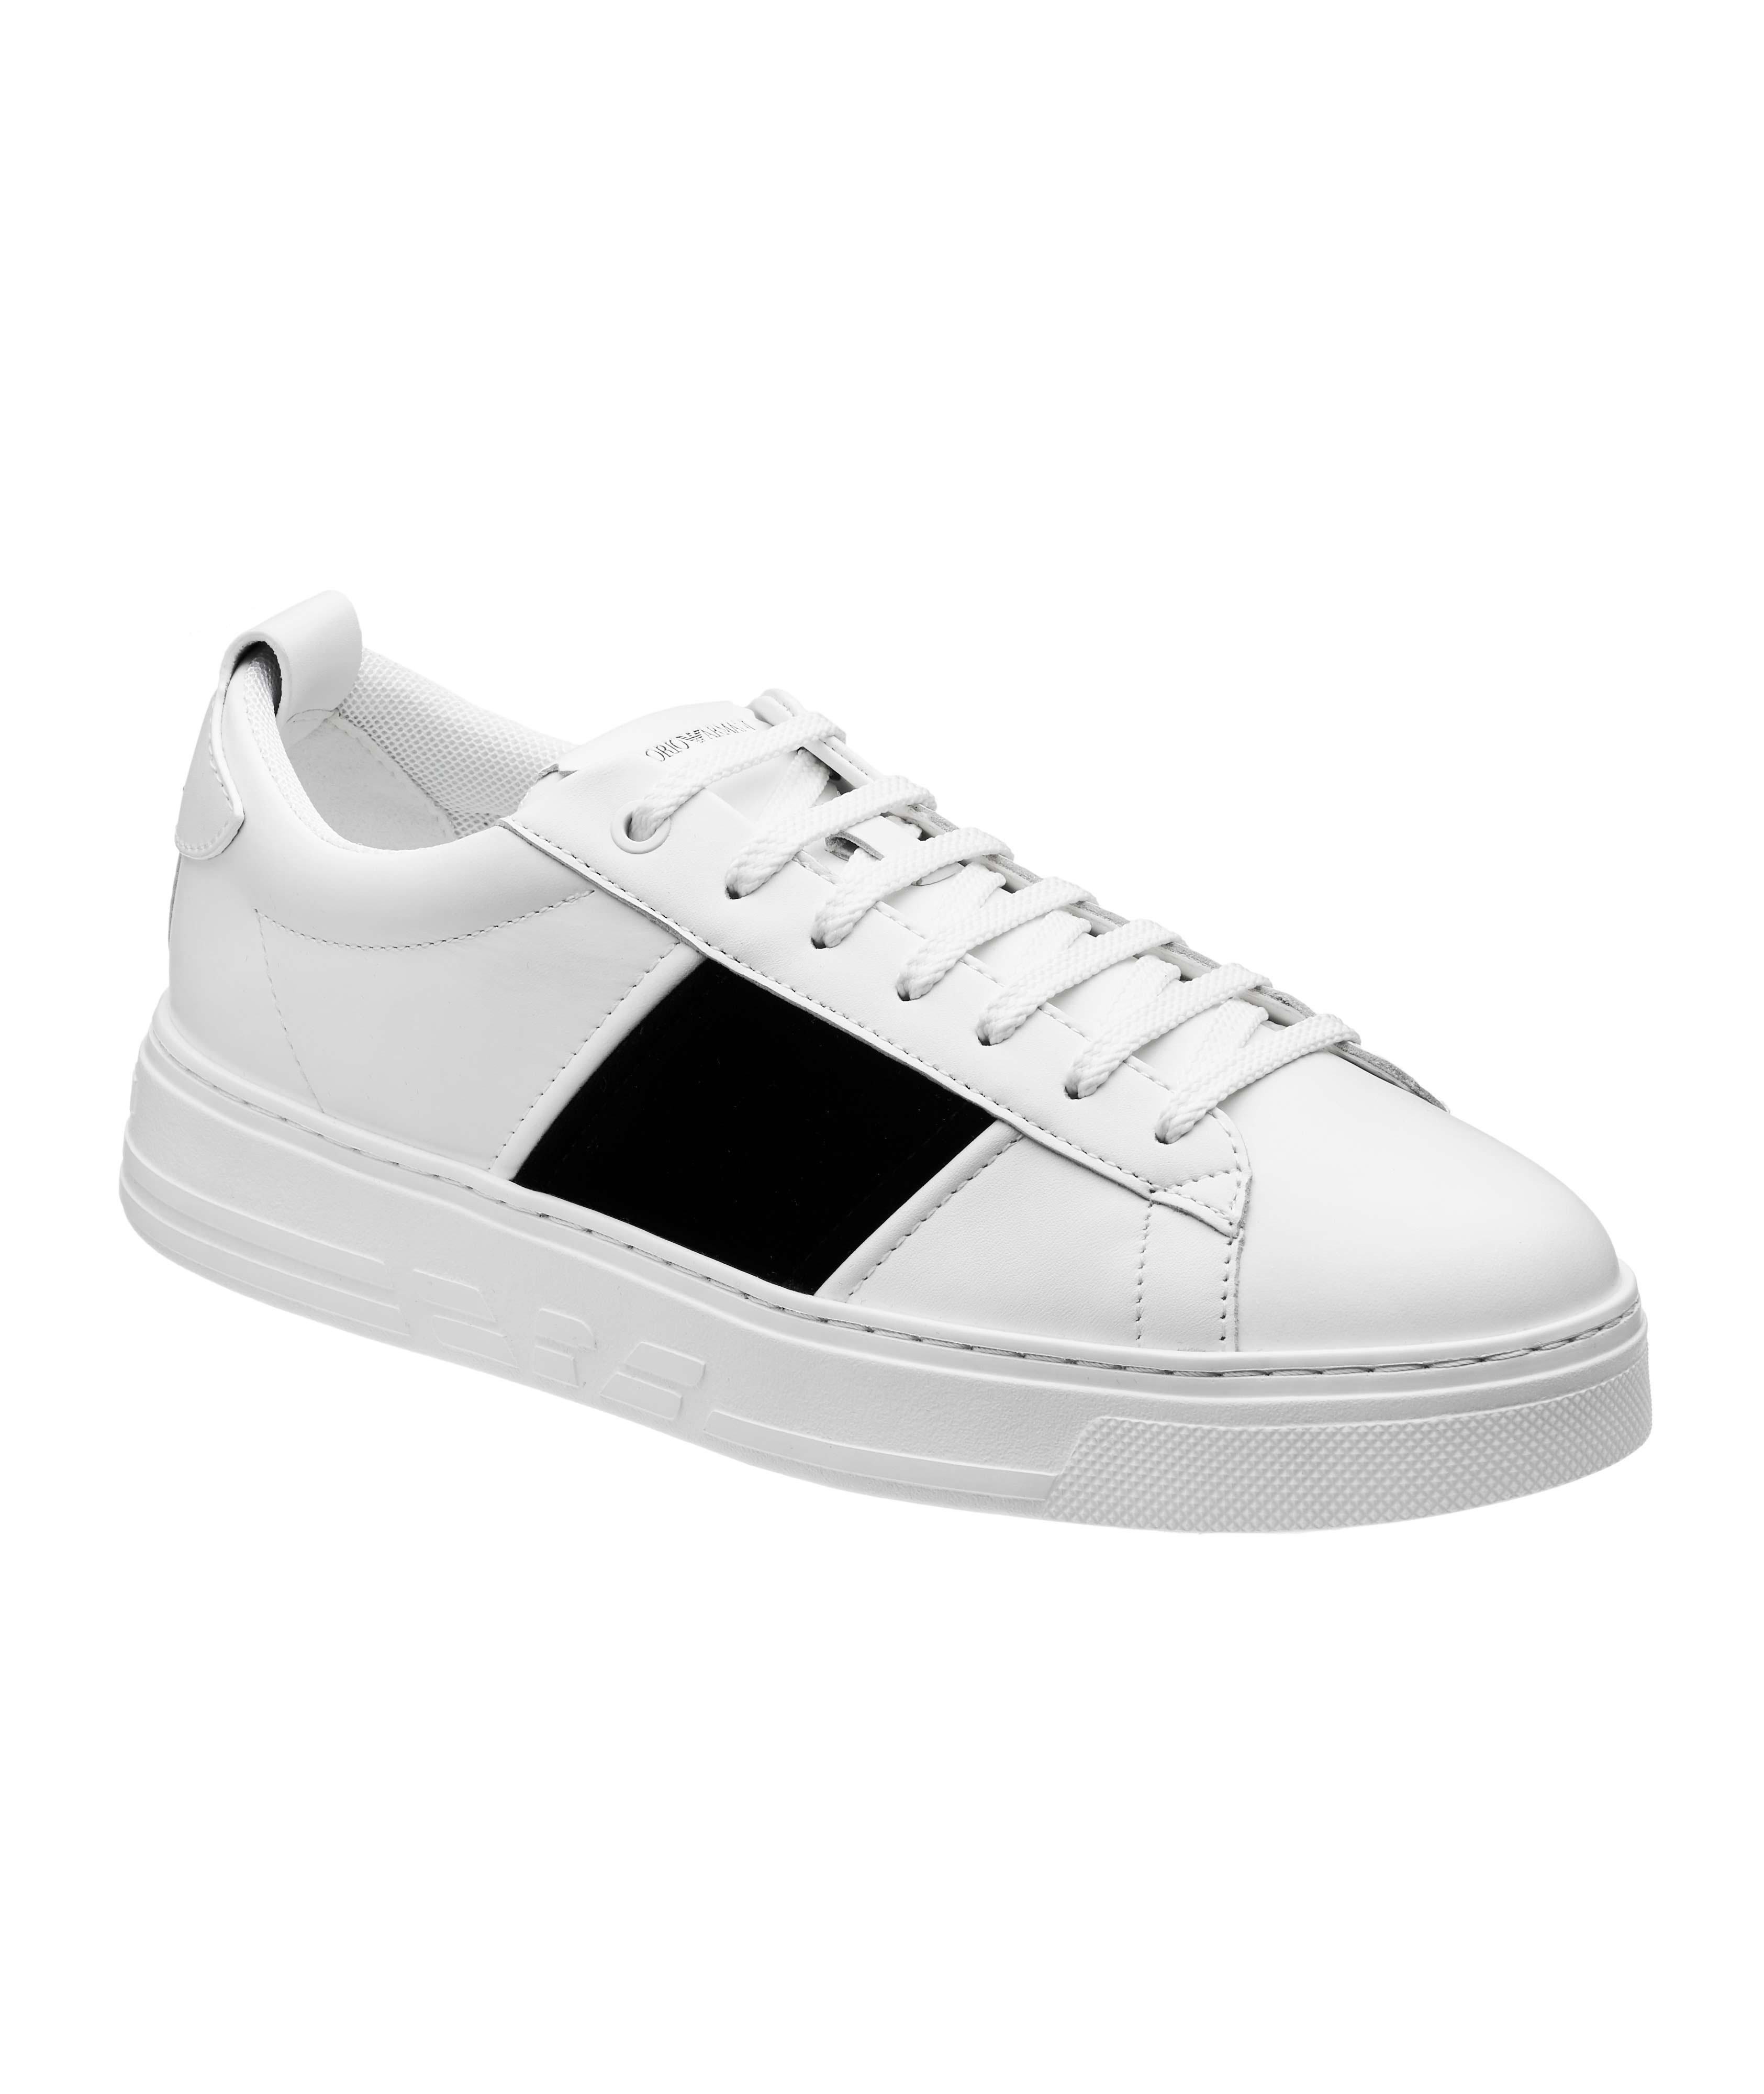 Leather and Suede Sneakers image 0